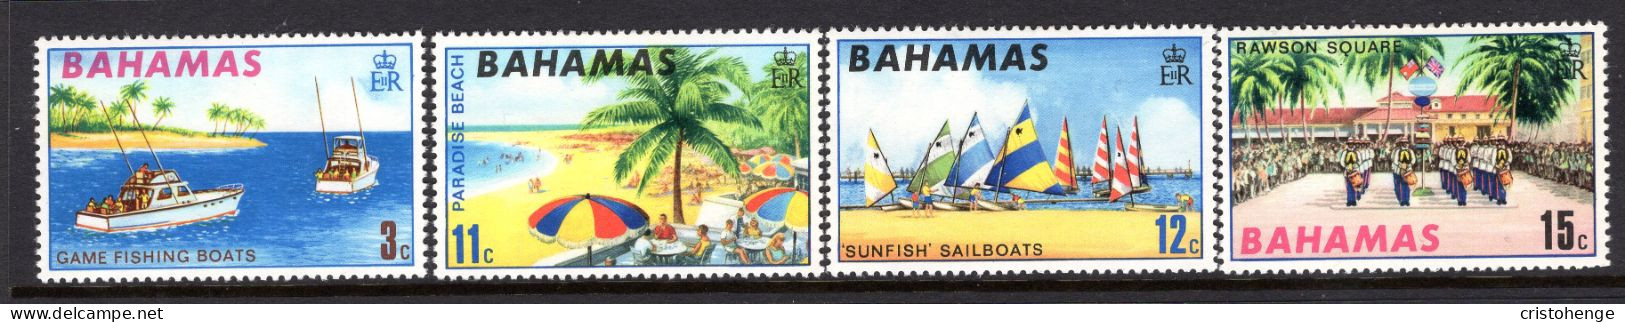 Bahamas 1969 Tourism - One Millionth Visitor To Bahamas Set LHM (SG 333-336) - 1963-1973 Ministerial Government